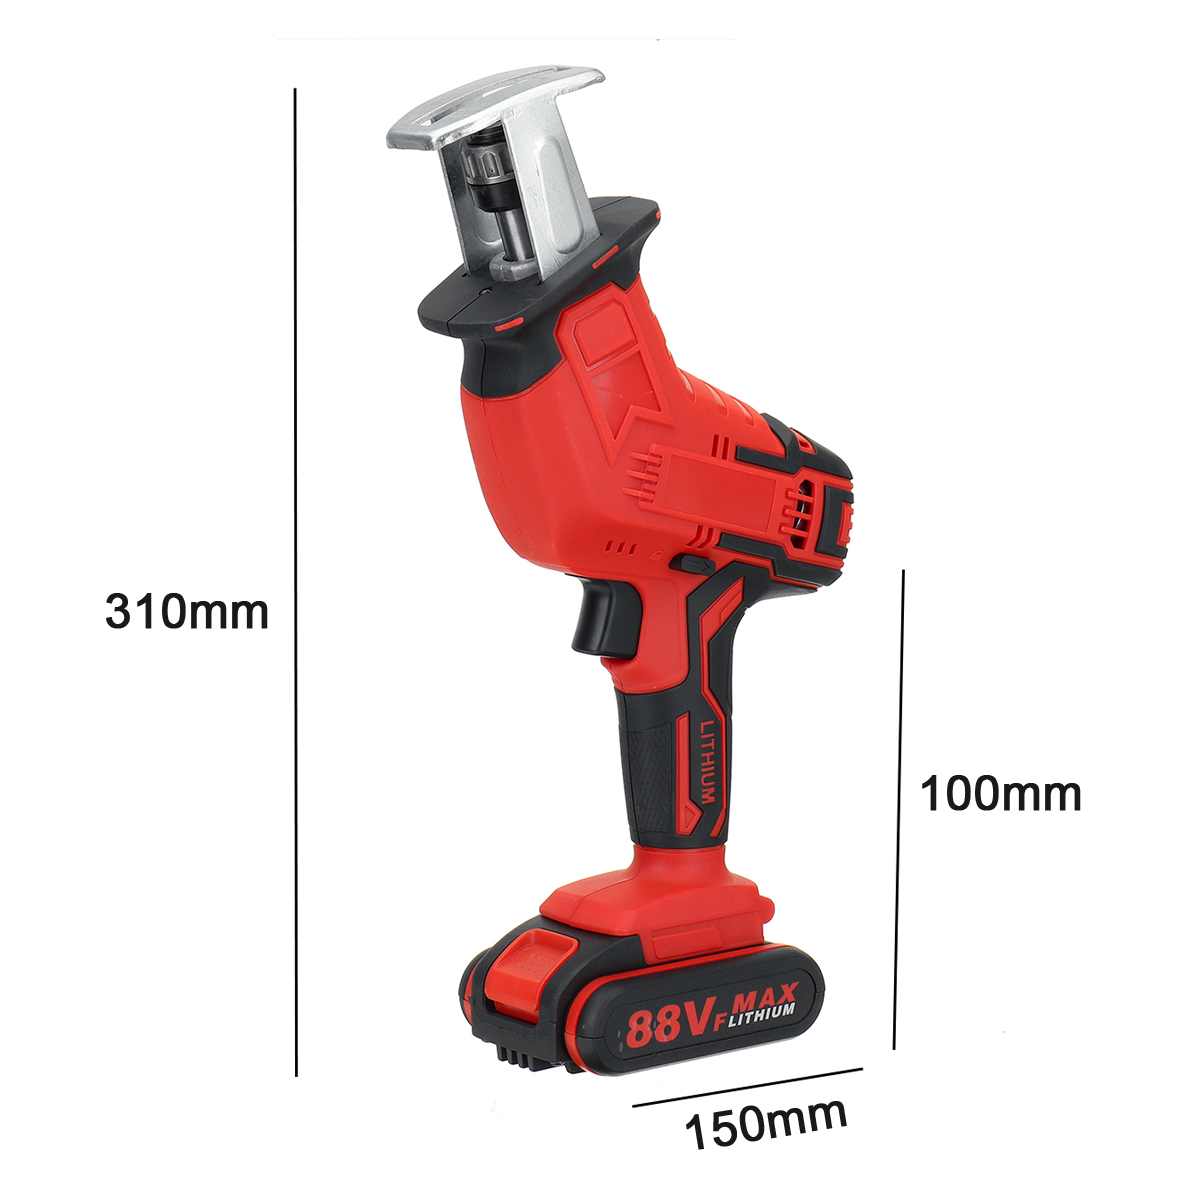 88VF-Electric-Reciprocating-Saws-Outdoor-Woodworking-Cordless-Portable-Saw-With-Blade-1721109-10